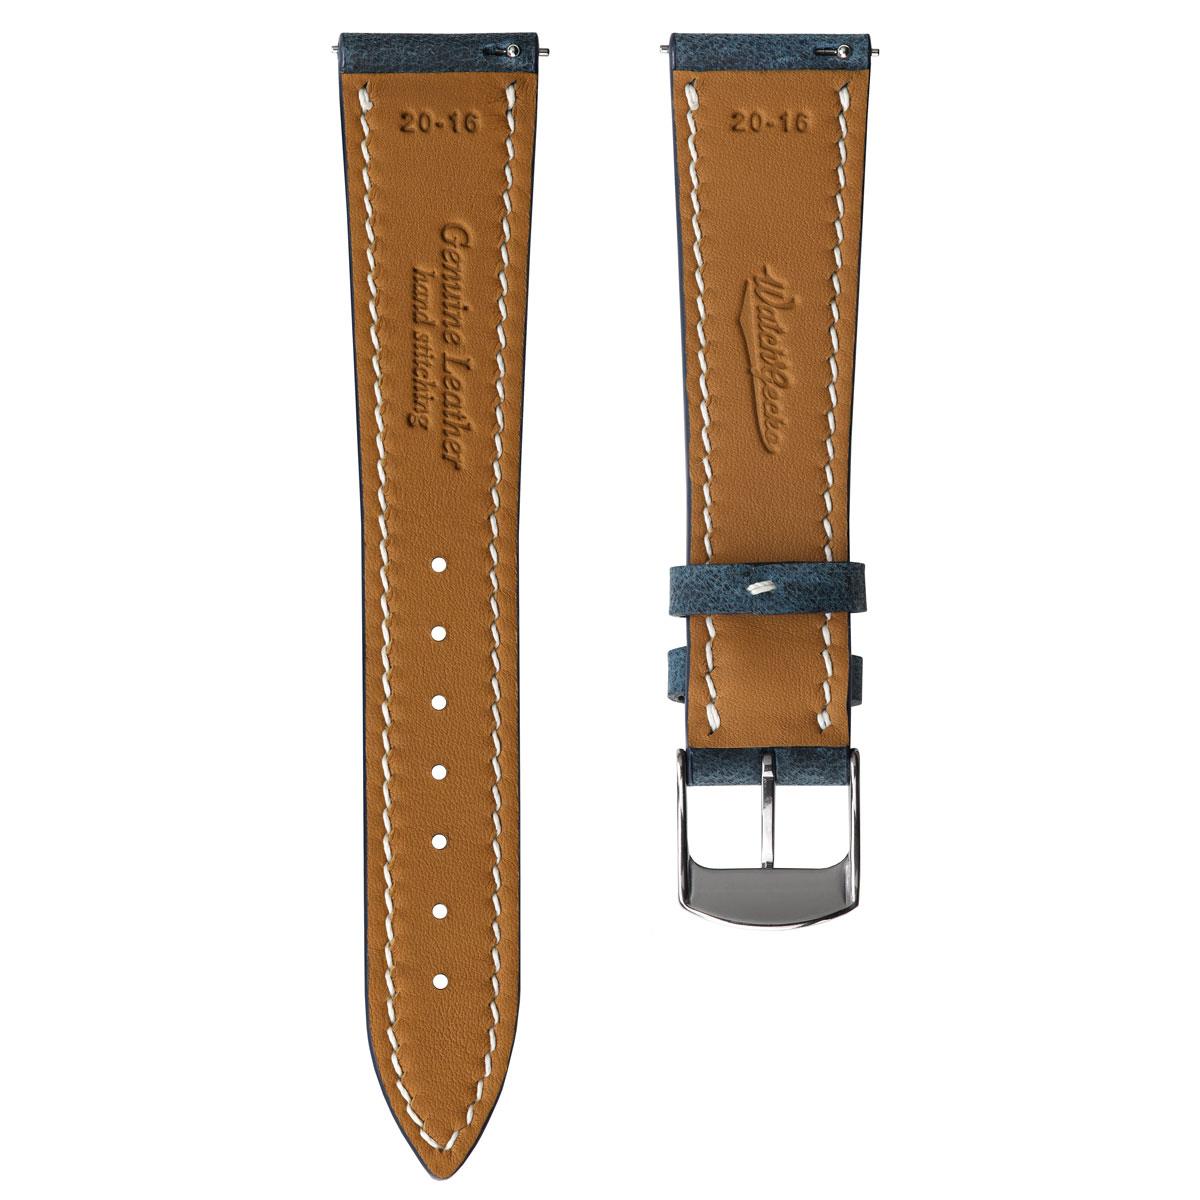 Hanley Crazy Horse Leather Watch Strap - Peacock Blue